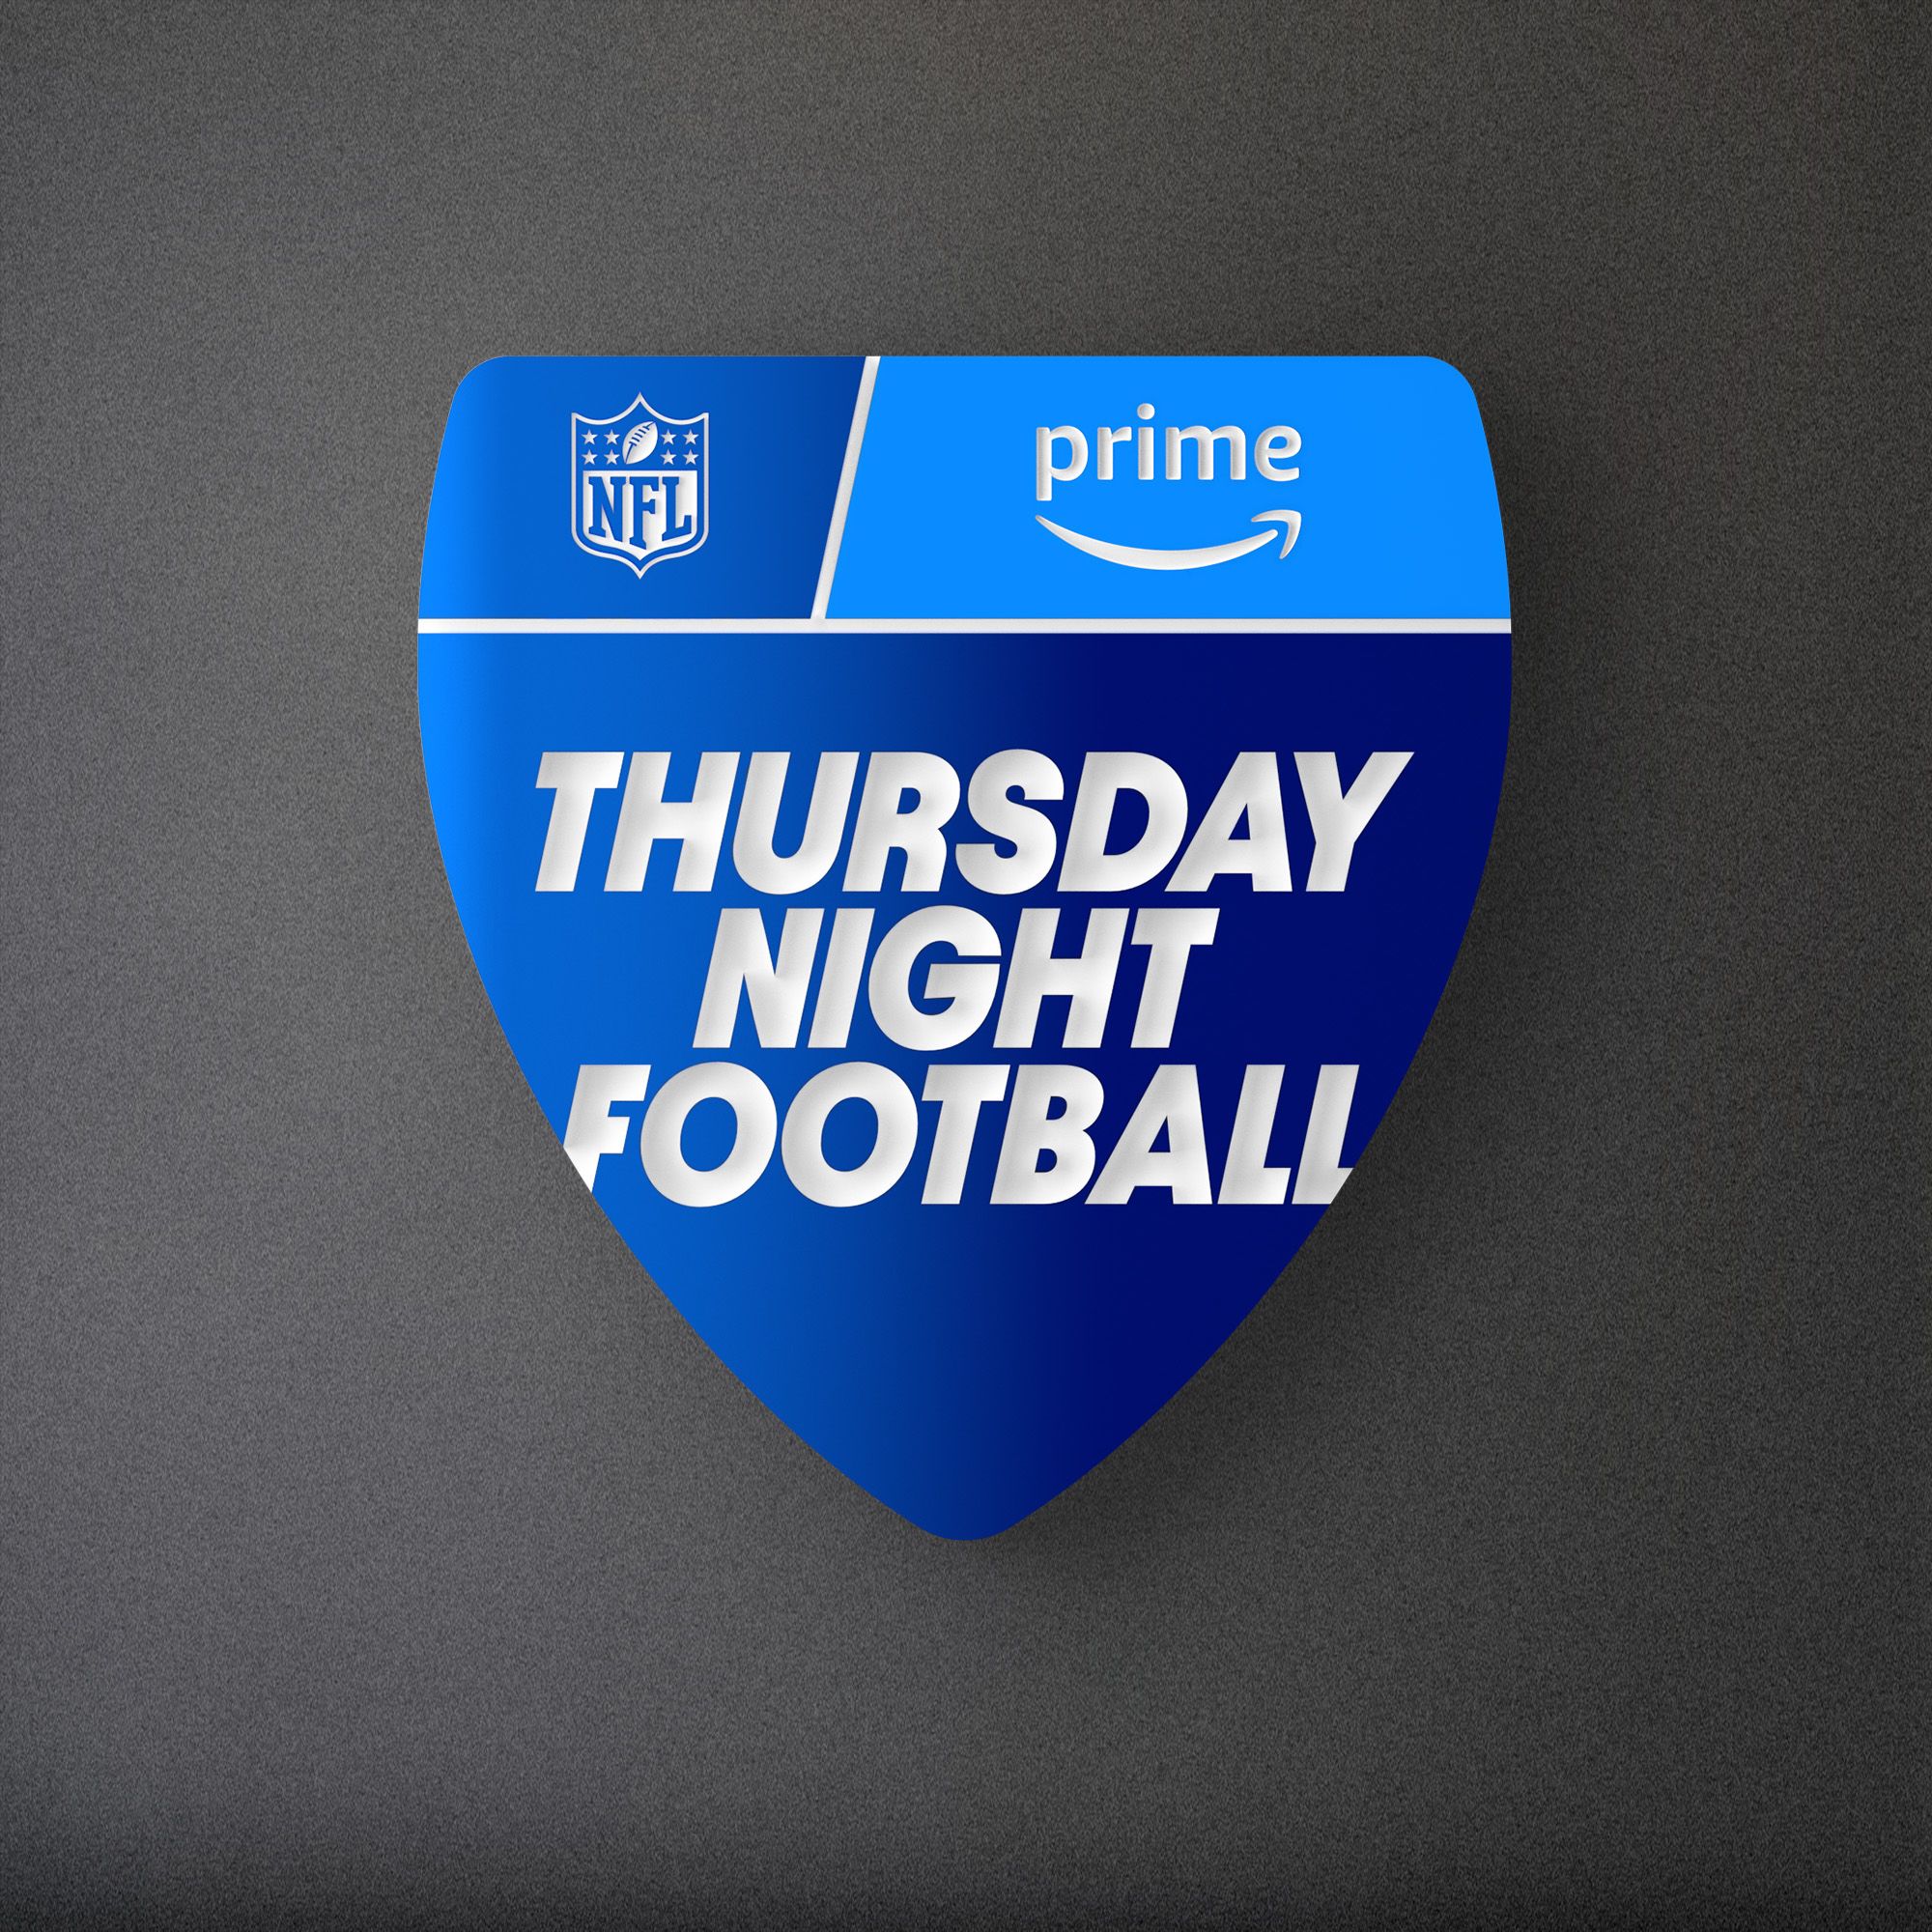 who's the thursday night nfl game tonight